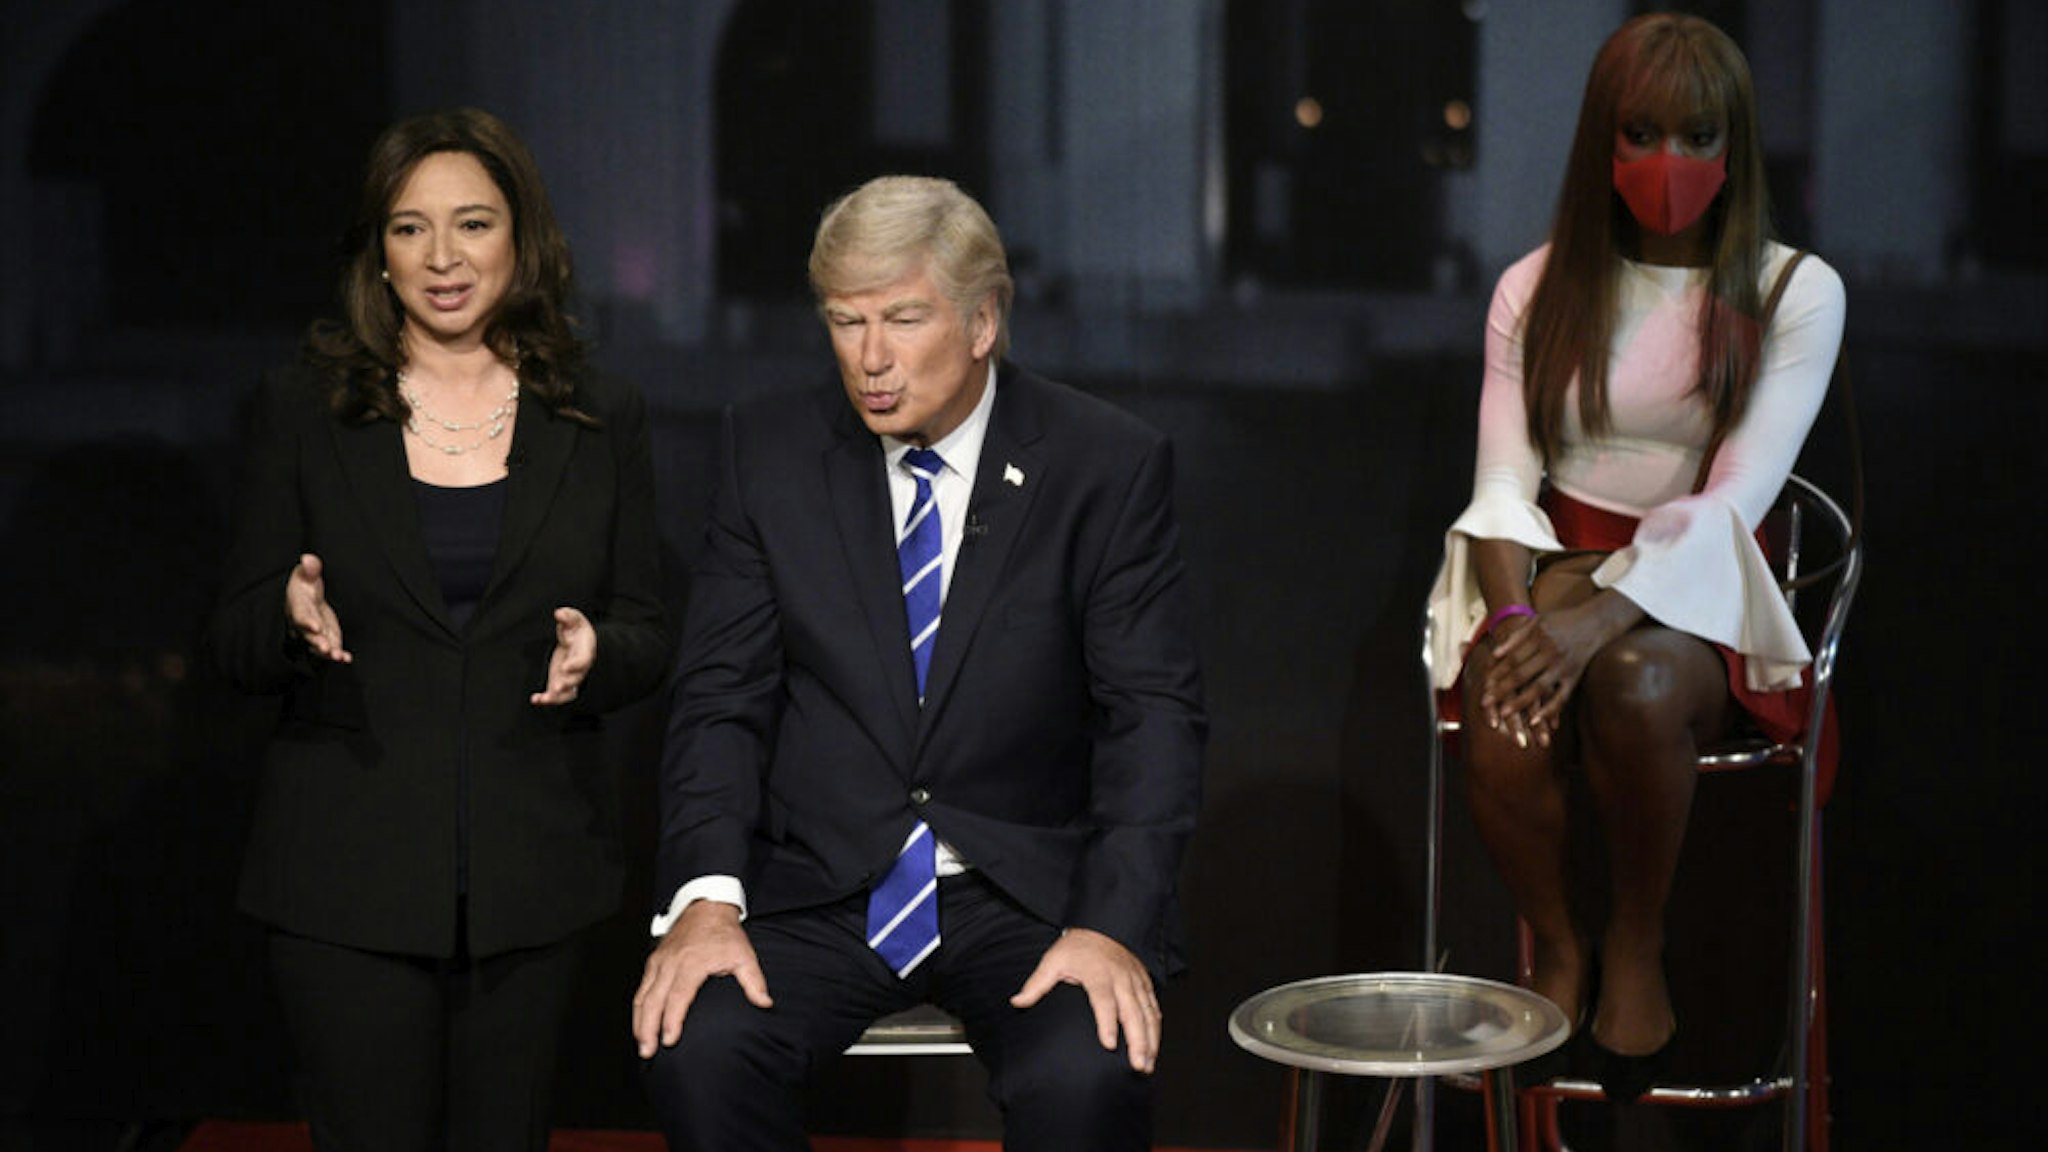 SATURDAY NIGHT LIVE -- "Issa Rae" Episode 1788 -- Pictured: (l-r) Maya Rudolph as Kamala Harris and Alec Baldwin as Donald Trump during the "Dueling Town Halls" Cold Open on Saturday, October 17, 2020